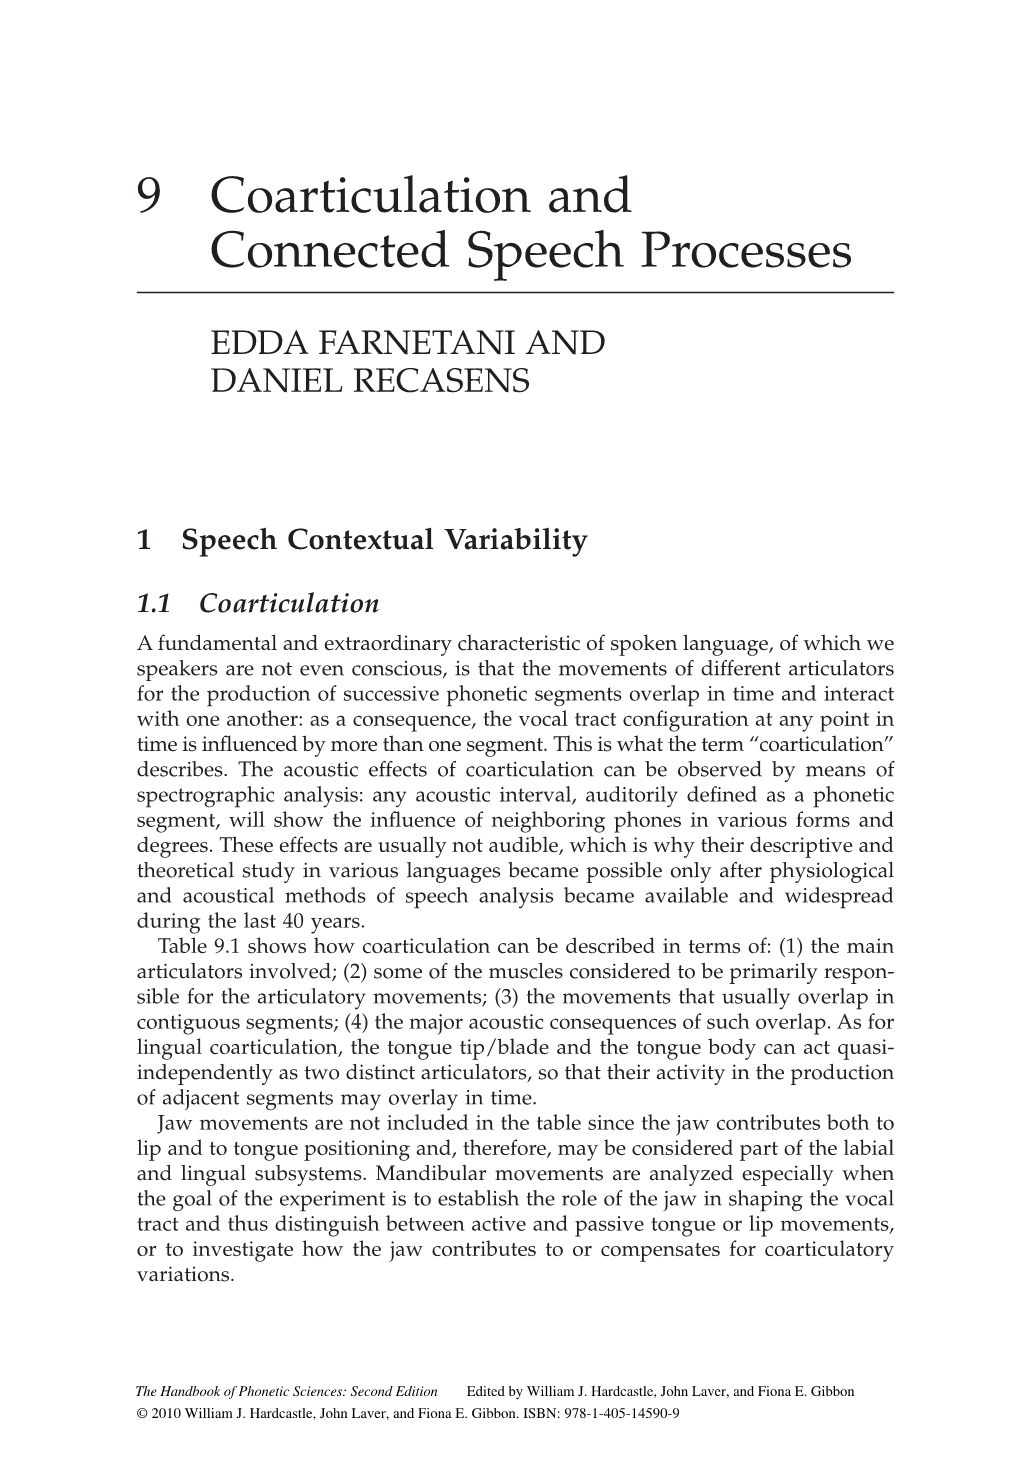 Coarticulation and Connected Speech Processes